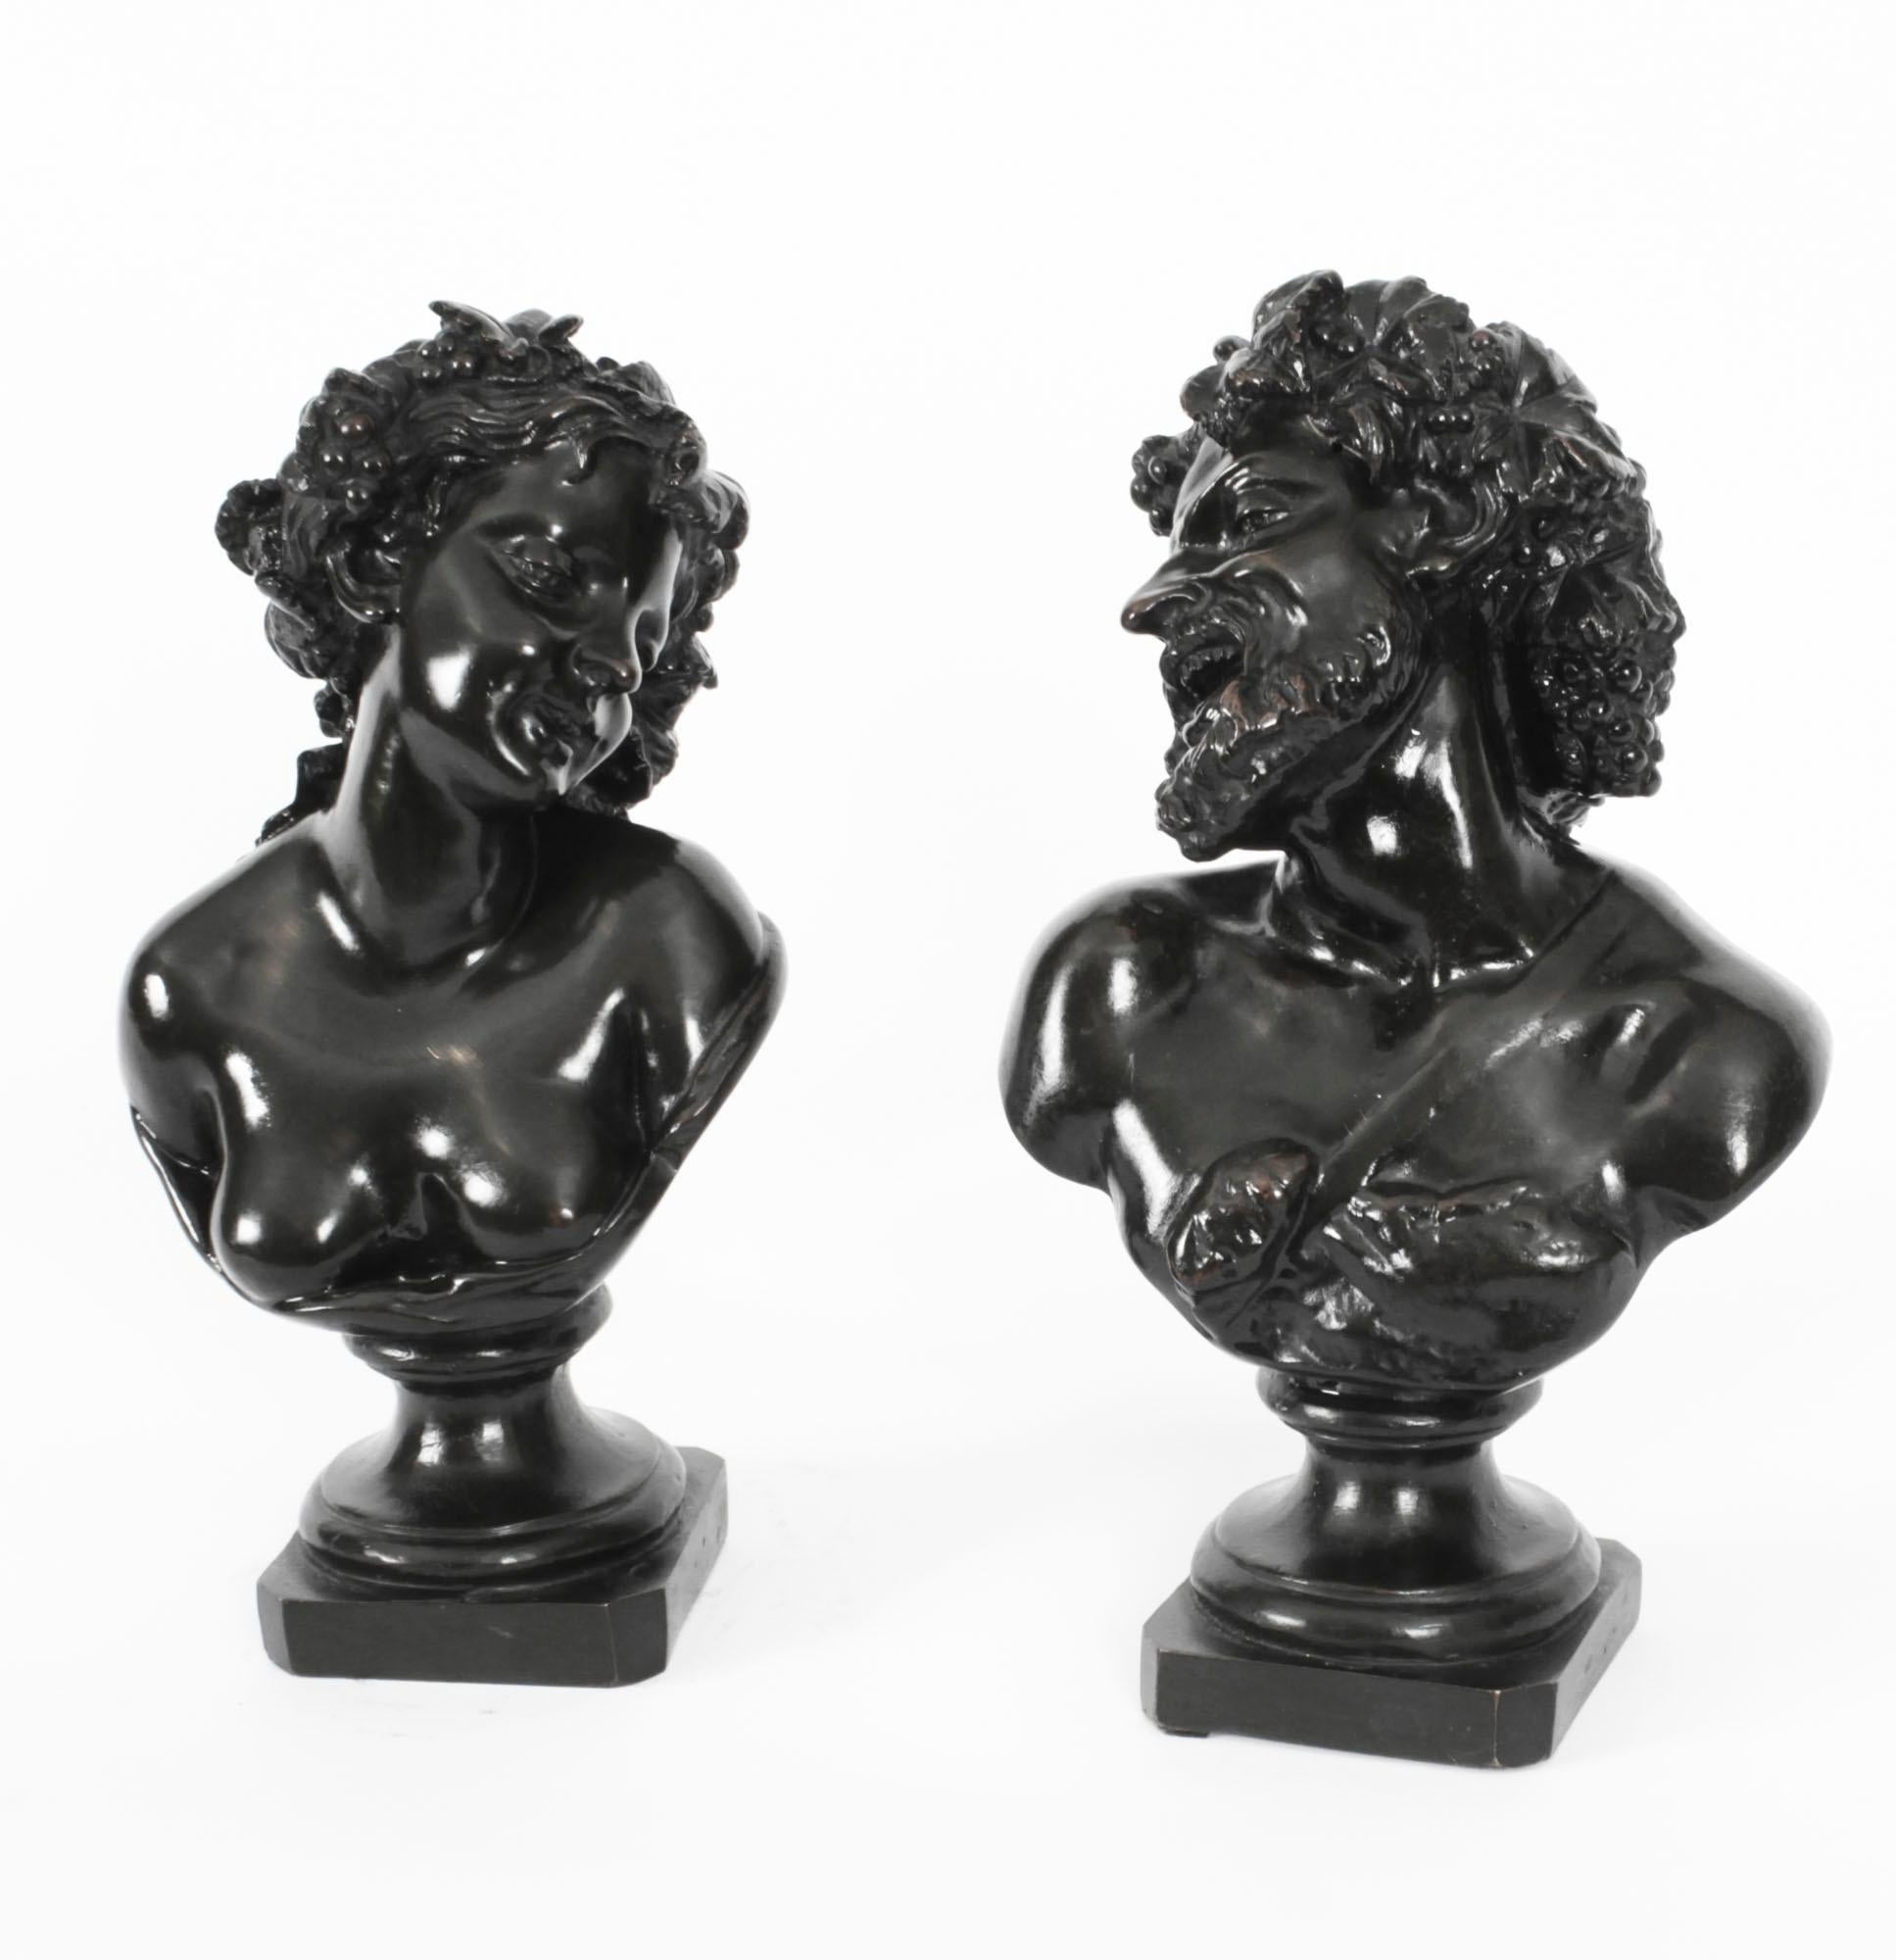 Antique Pair Italian Bronze Busts Dionysus and Ariadne by Clodion 18th Century For Sale 15